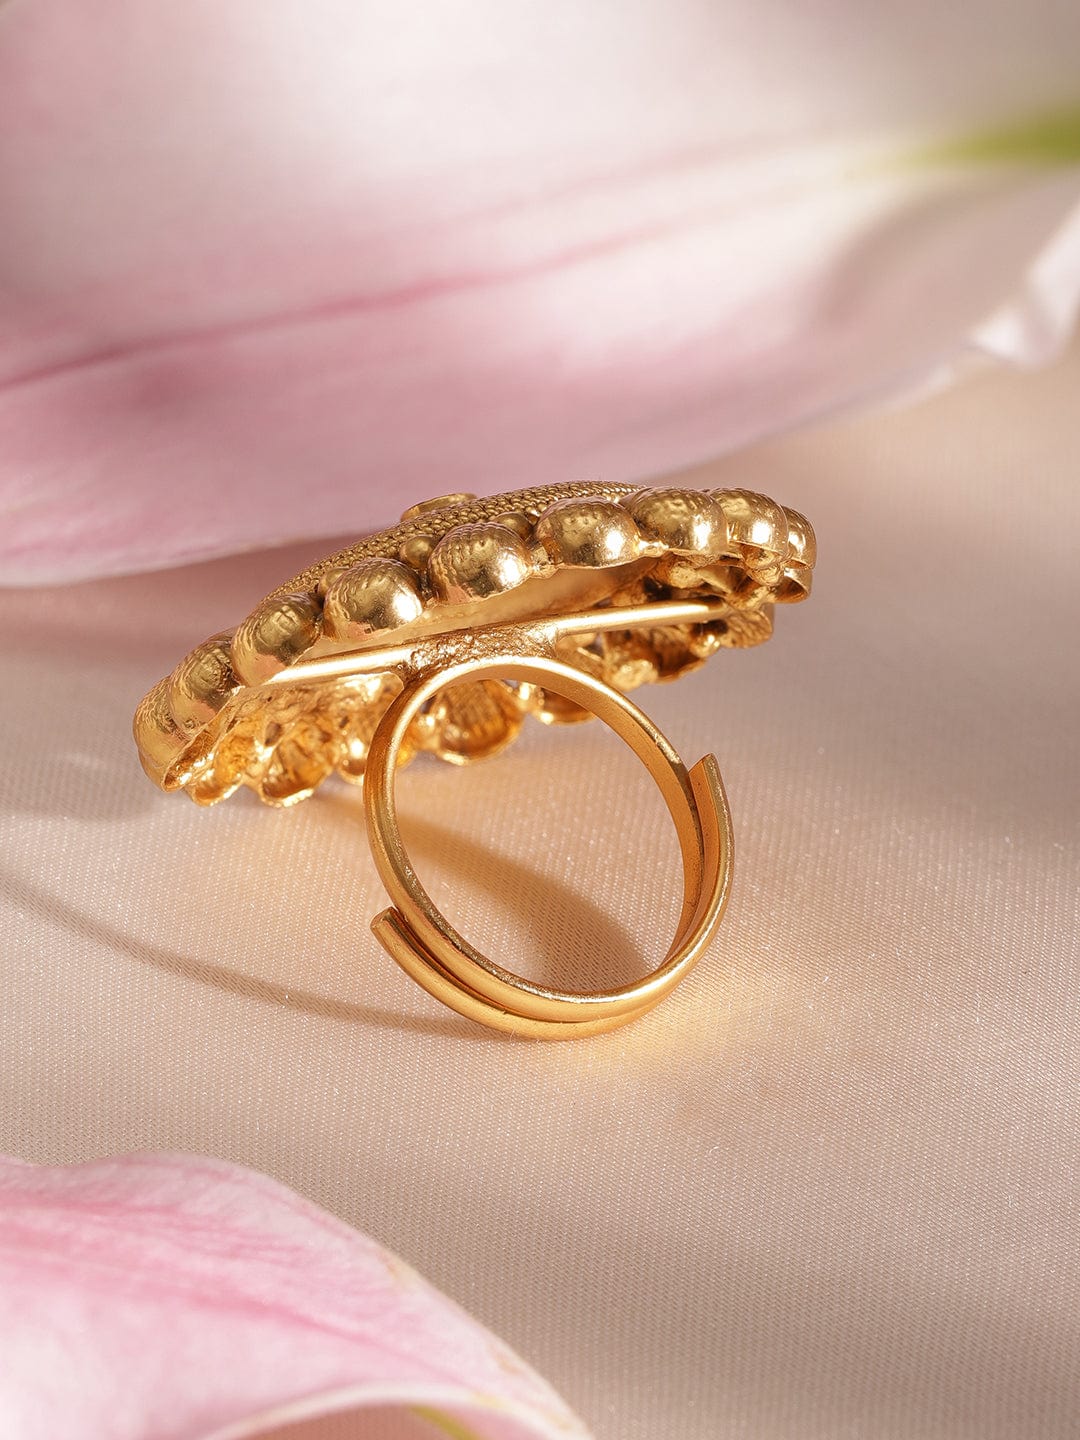 Rubans Opulent Elegance: 22K Gold-Plated Statement Rings for Timeless Style Rings